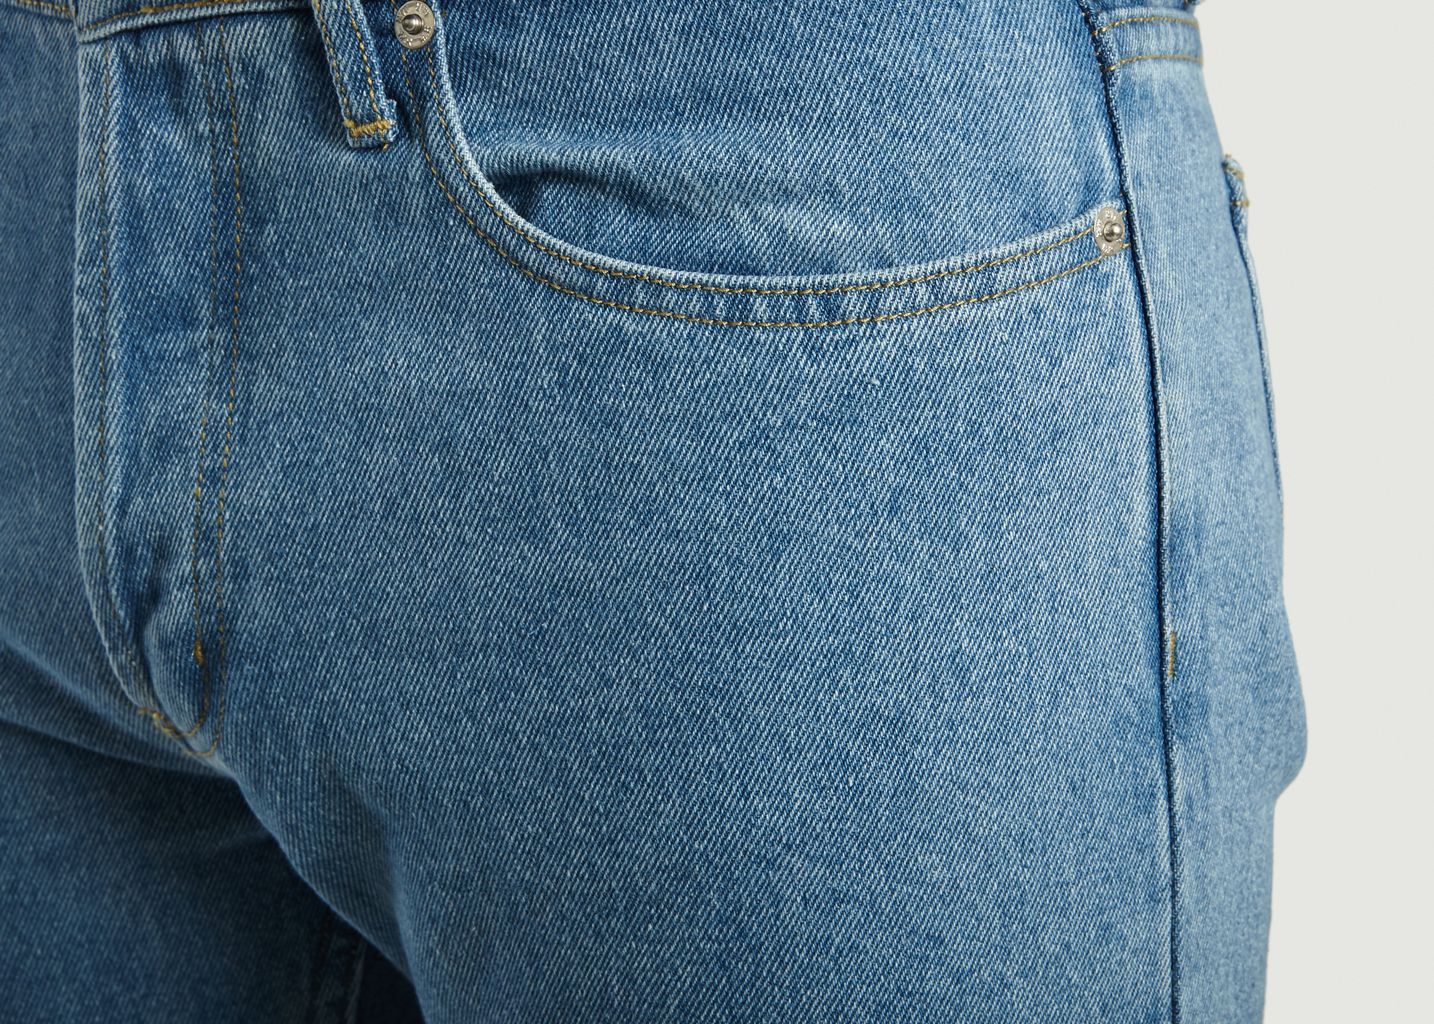 5 Pocket Jeans - Editions M.R